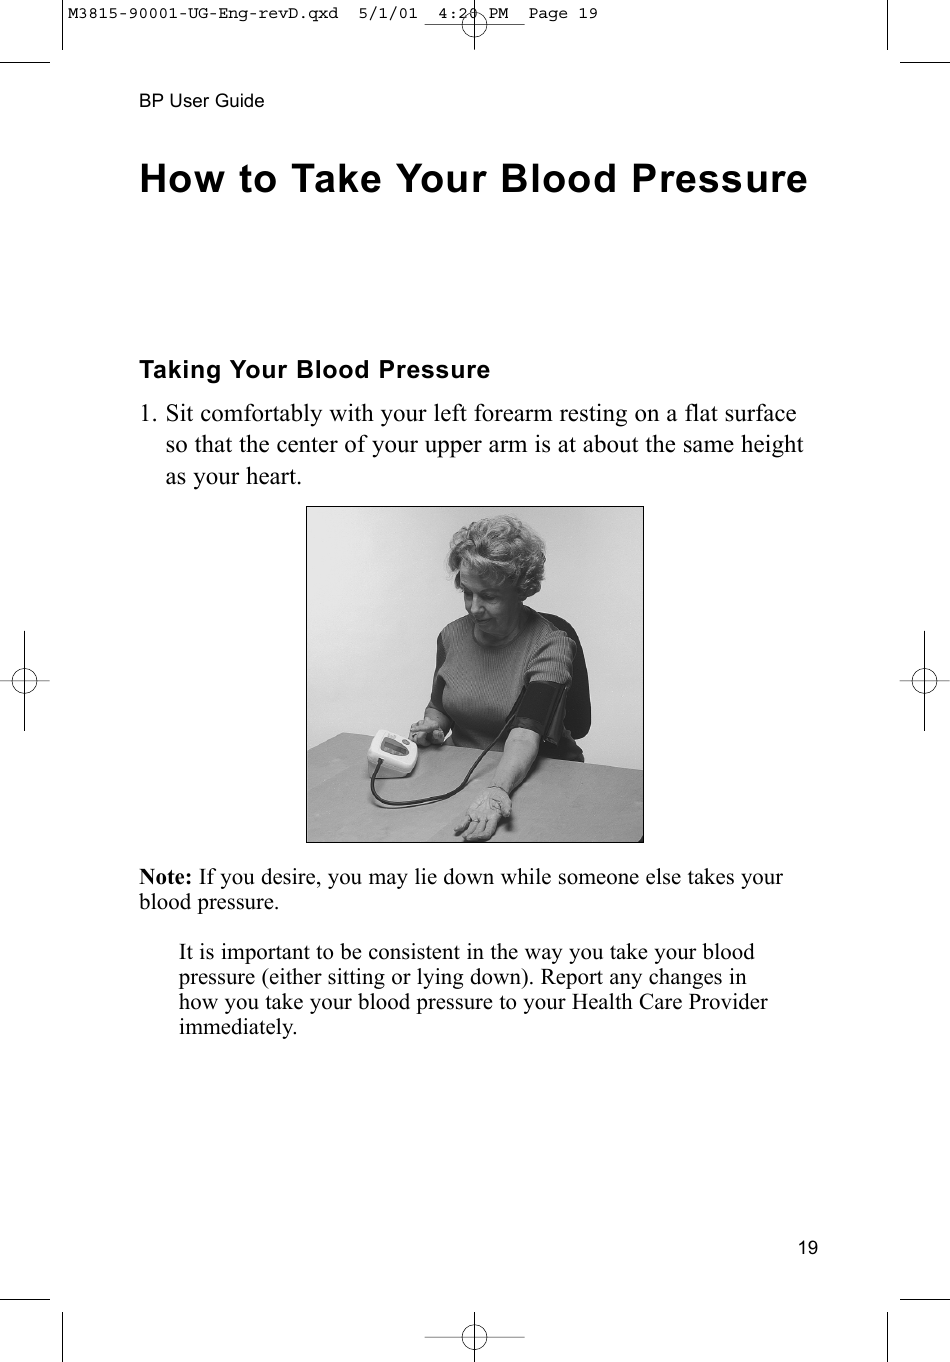 19BP User GuideHow to Take Your Blood PressureTaking Your Blood Pressure1. Sit comfortably with your left forearm resting on a flat surfaceso that the center of your upper arm is at about the same heightas your heart.Note: If you desire, you may lie down while someone else takes yourblood pressure.It is important to be consistent in the way you take your blood pressure (either sitting or lying down). Report any changes in how you take your blood pressure to your Health Care Providerimmediately.M3815-90001-UG-Eng-revD.qxd  5/1/01  4:20 PM  Page 19